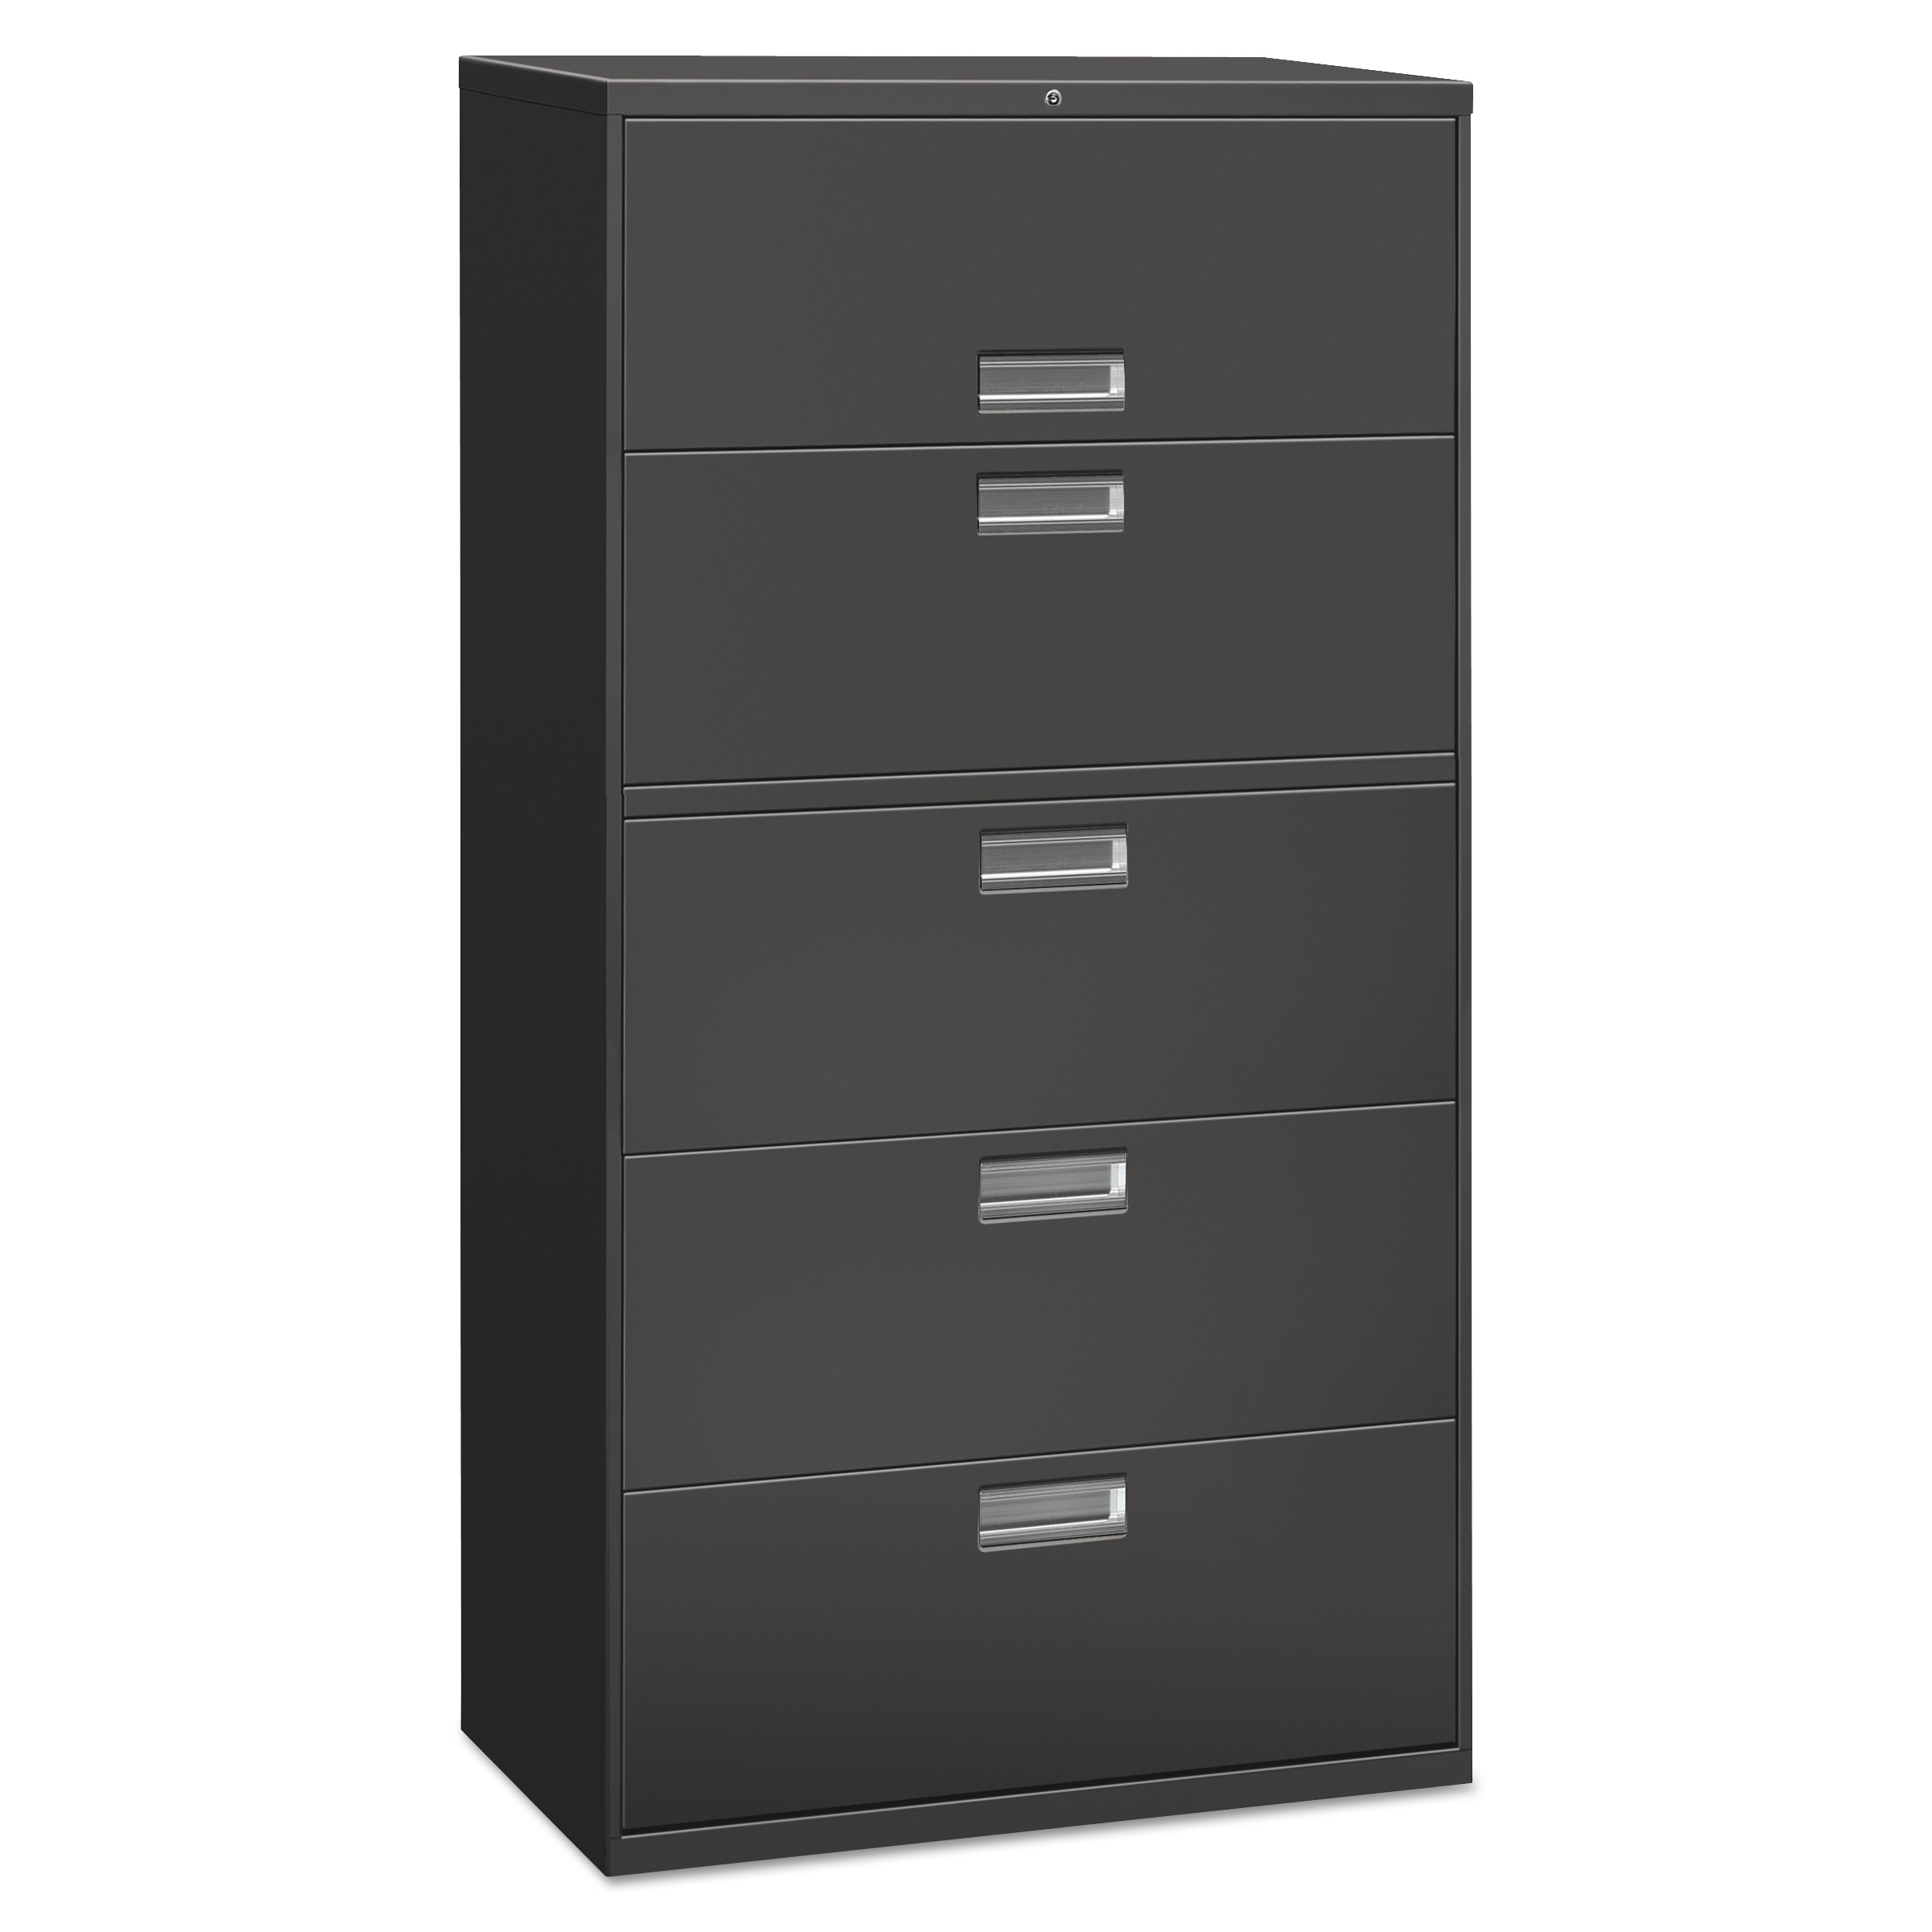 Alera Lateral File, 5 Drawer, 36w x 19.25d x 67h, Charcoal - image 1 of 2